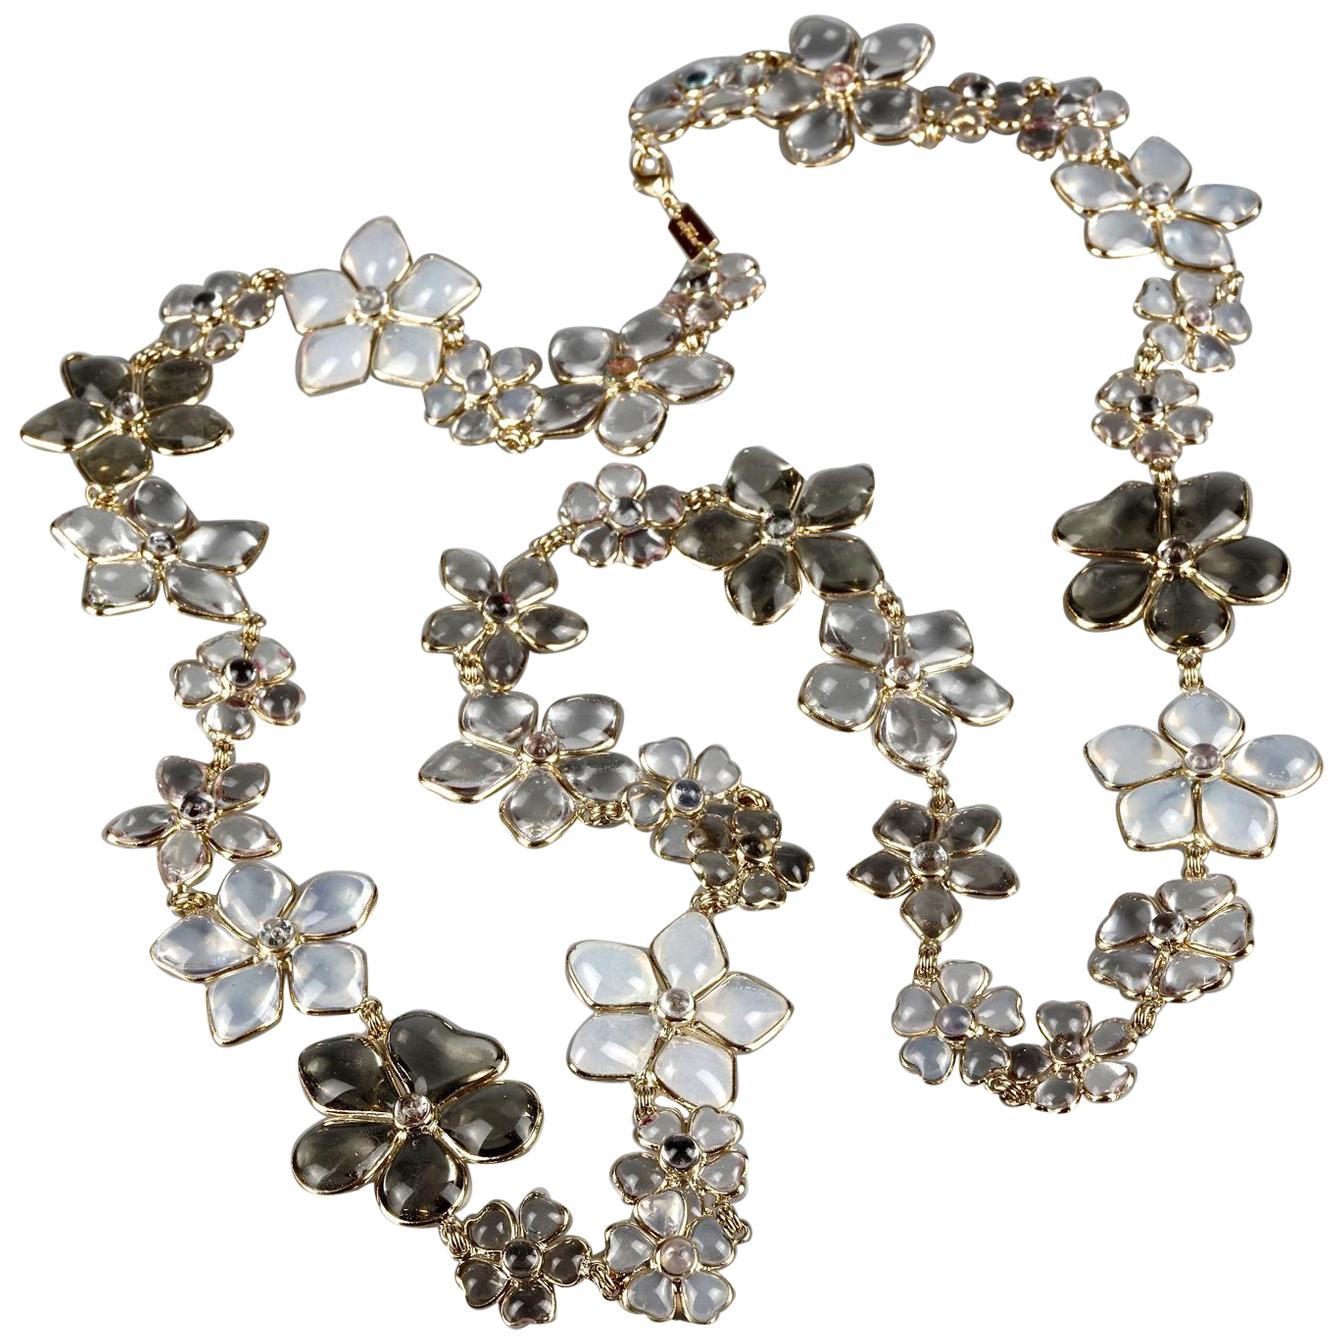 AUGUSTINE PARIS by Thierry GRIPOIX Poured Glass Flower Long Necklace For Sale